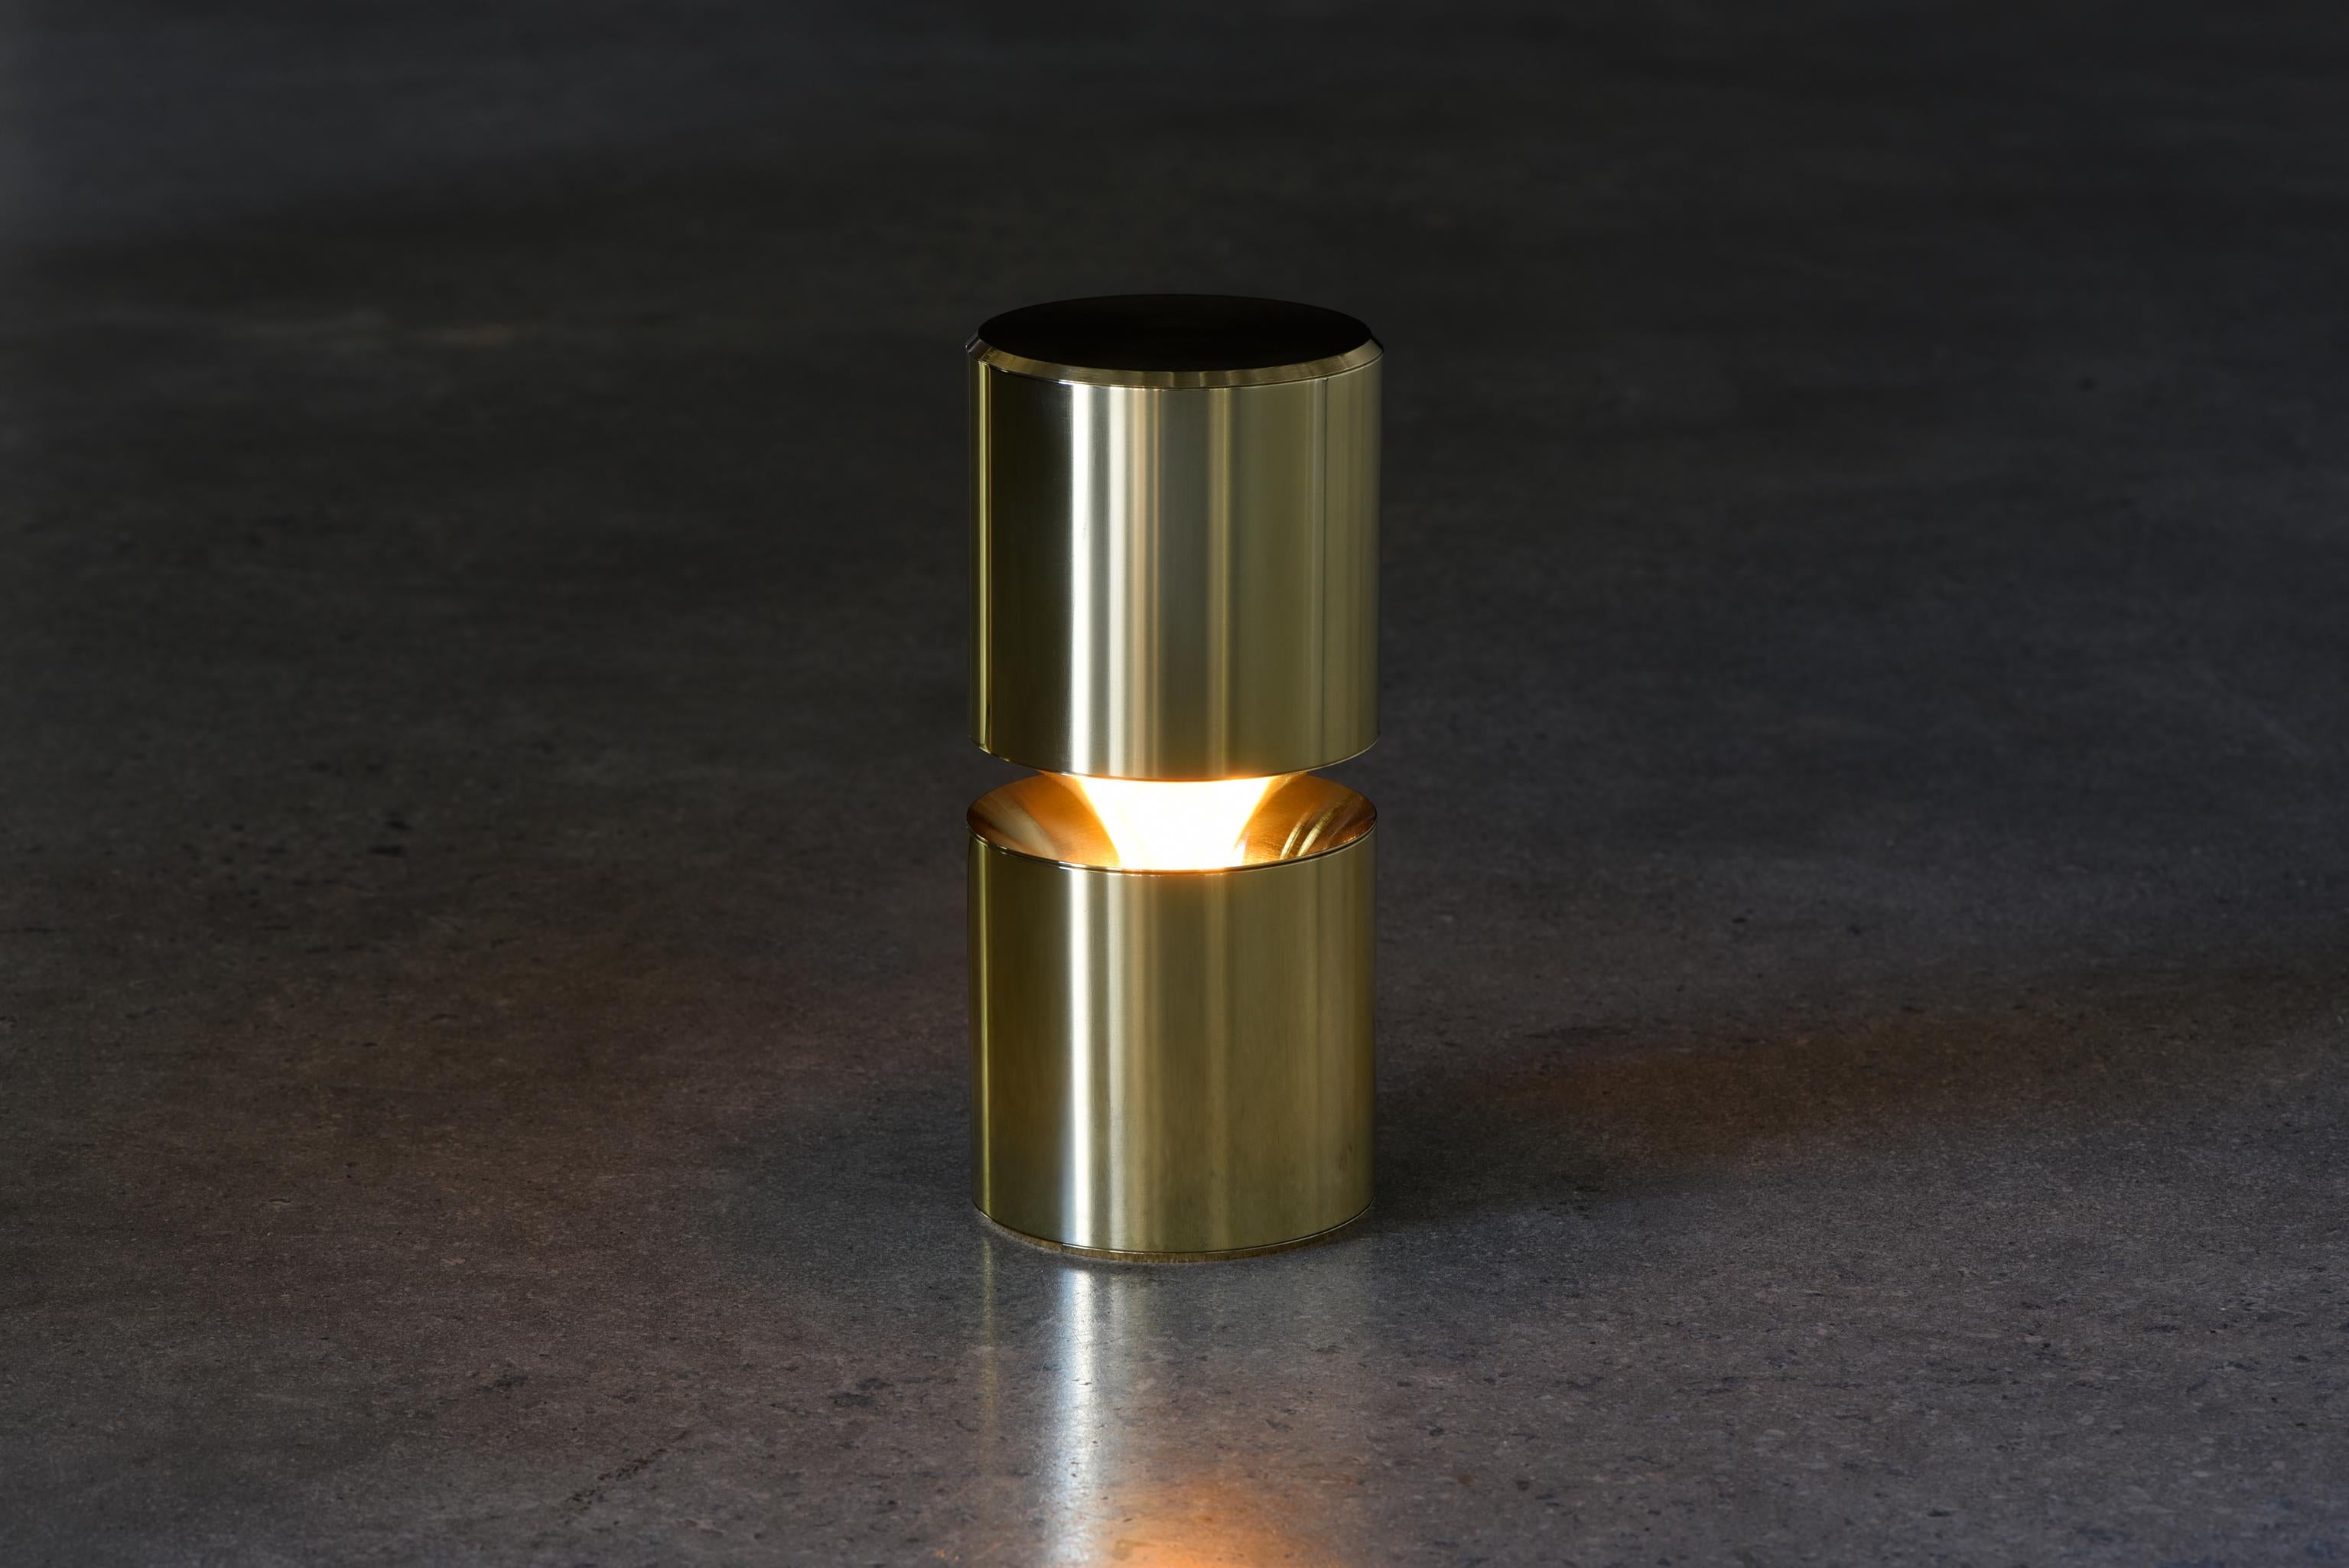 Honne by Callum Campbell
Objects for self collection
Signed and numbered
Dimensions: W 9.5 x H 19- 25 cm 
Materials: Brass, LED
Finish: Polished
Note: 220-240w Australian electrical transformer provided

It is at times difficult to